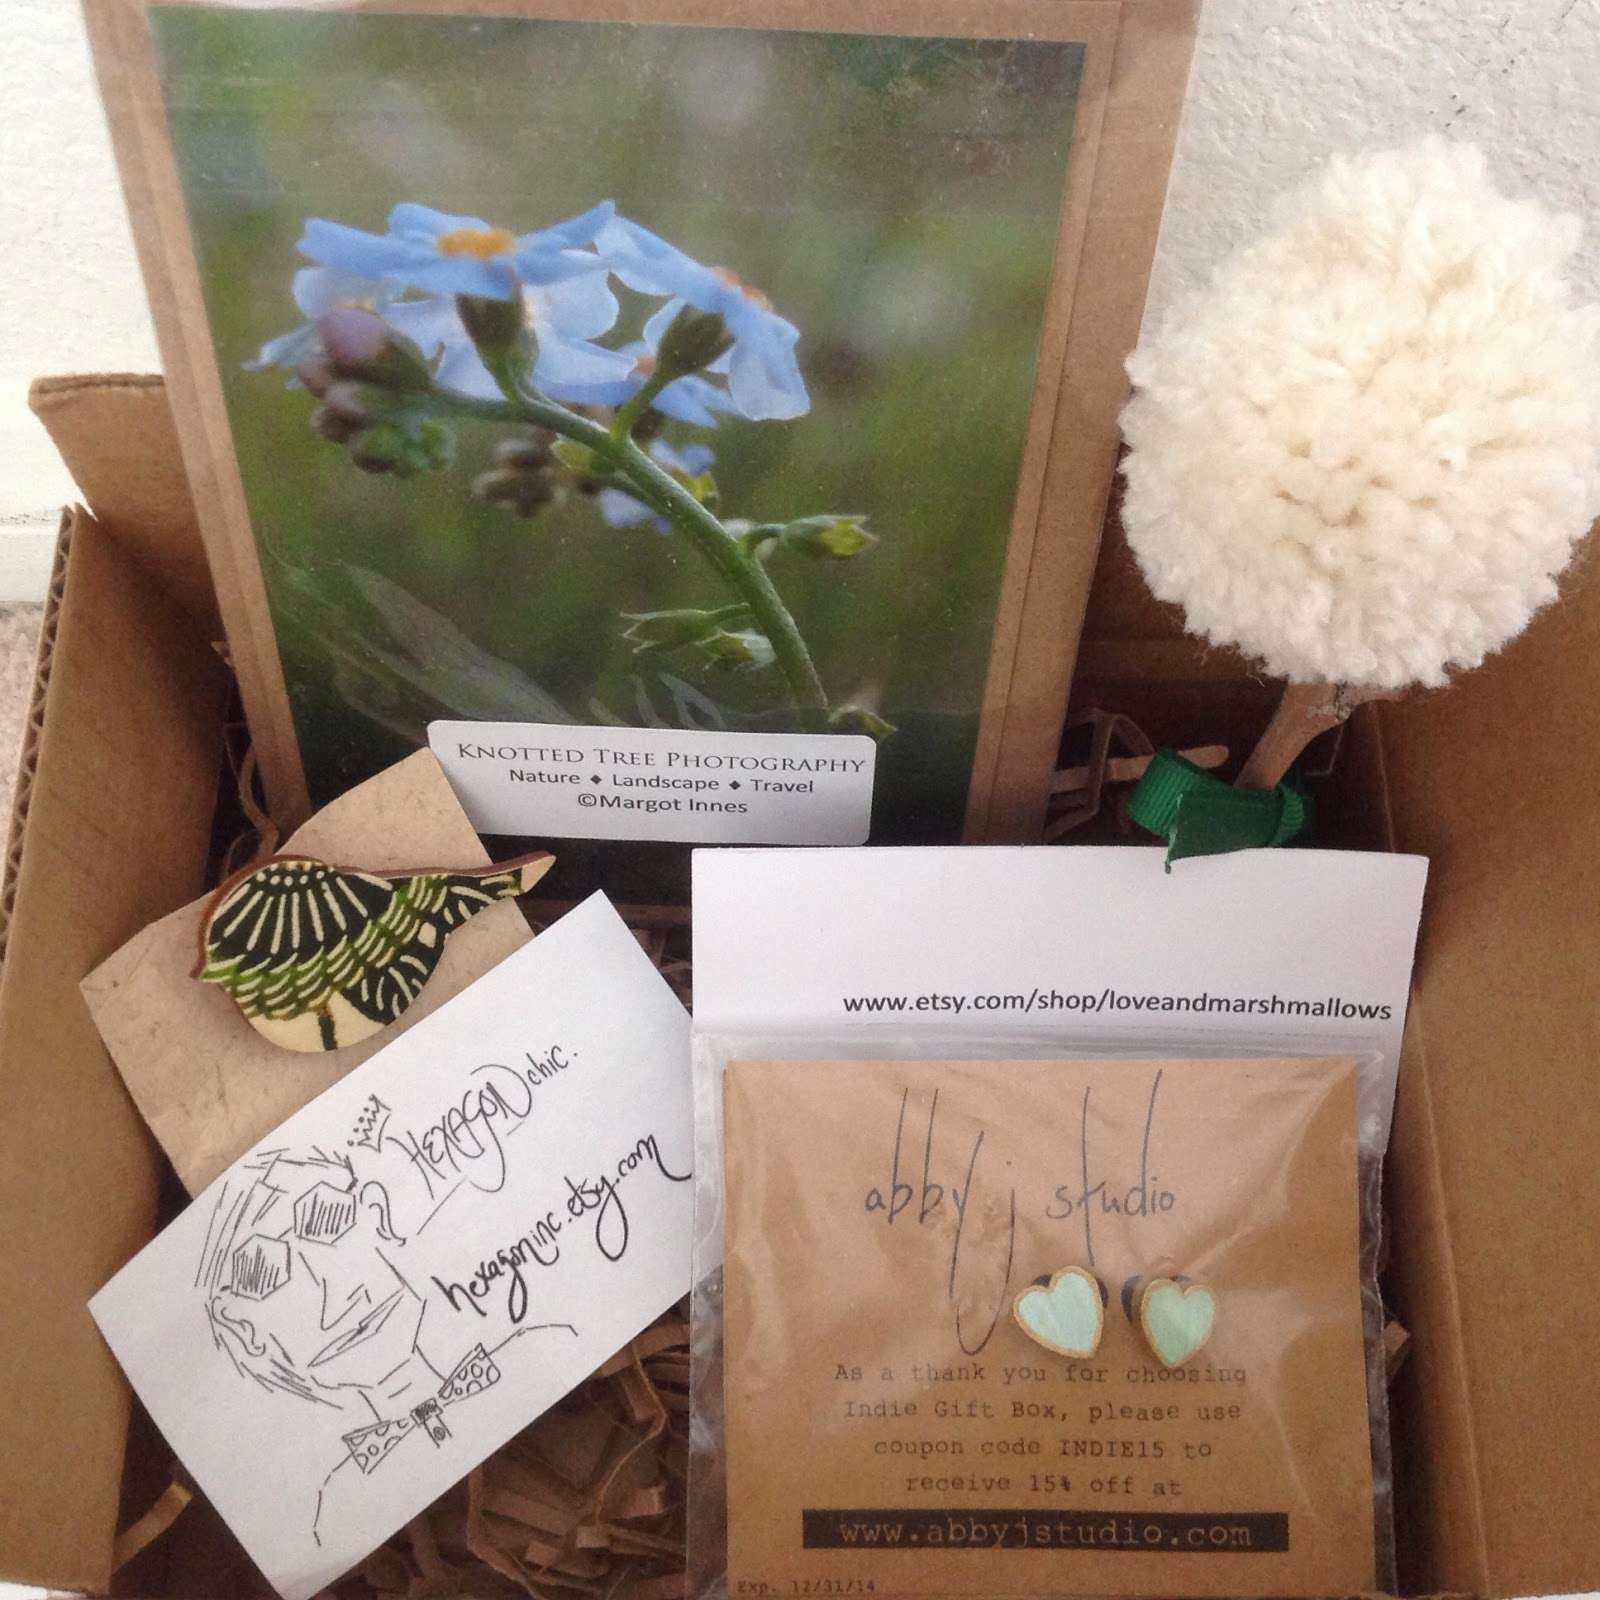 Subscriptions 4 Fun: INDIE GIFT BOX CHANGED TO DOTTIEBOX